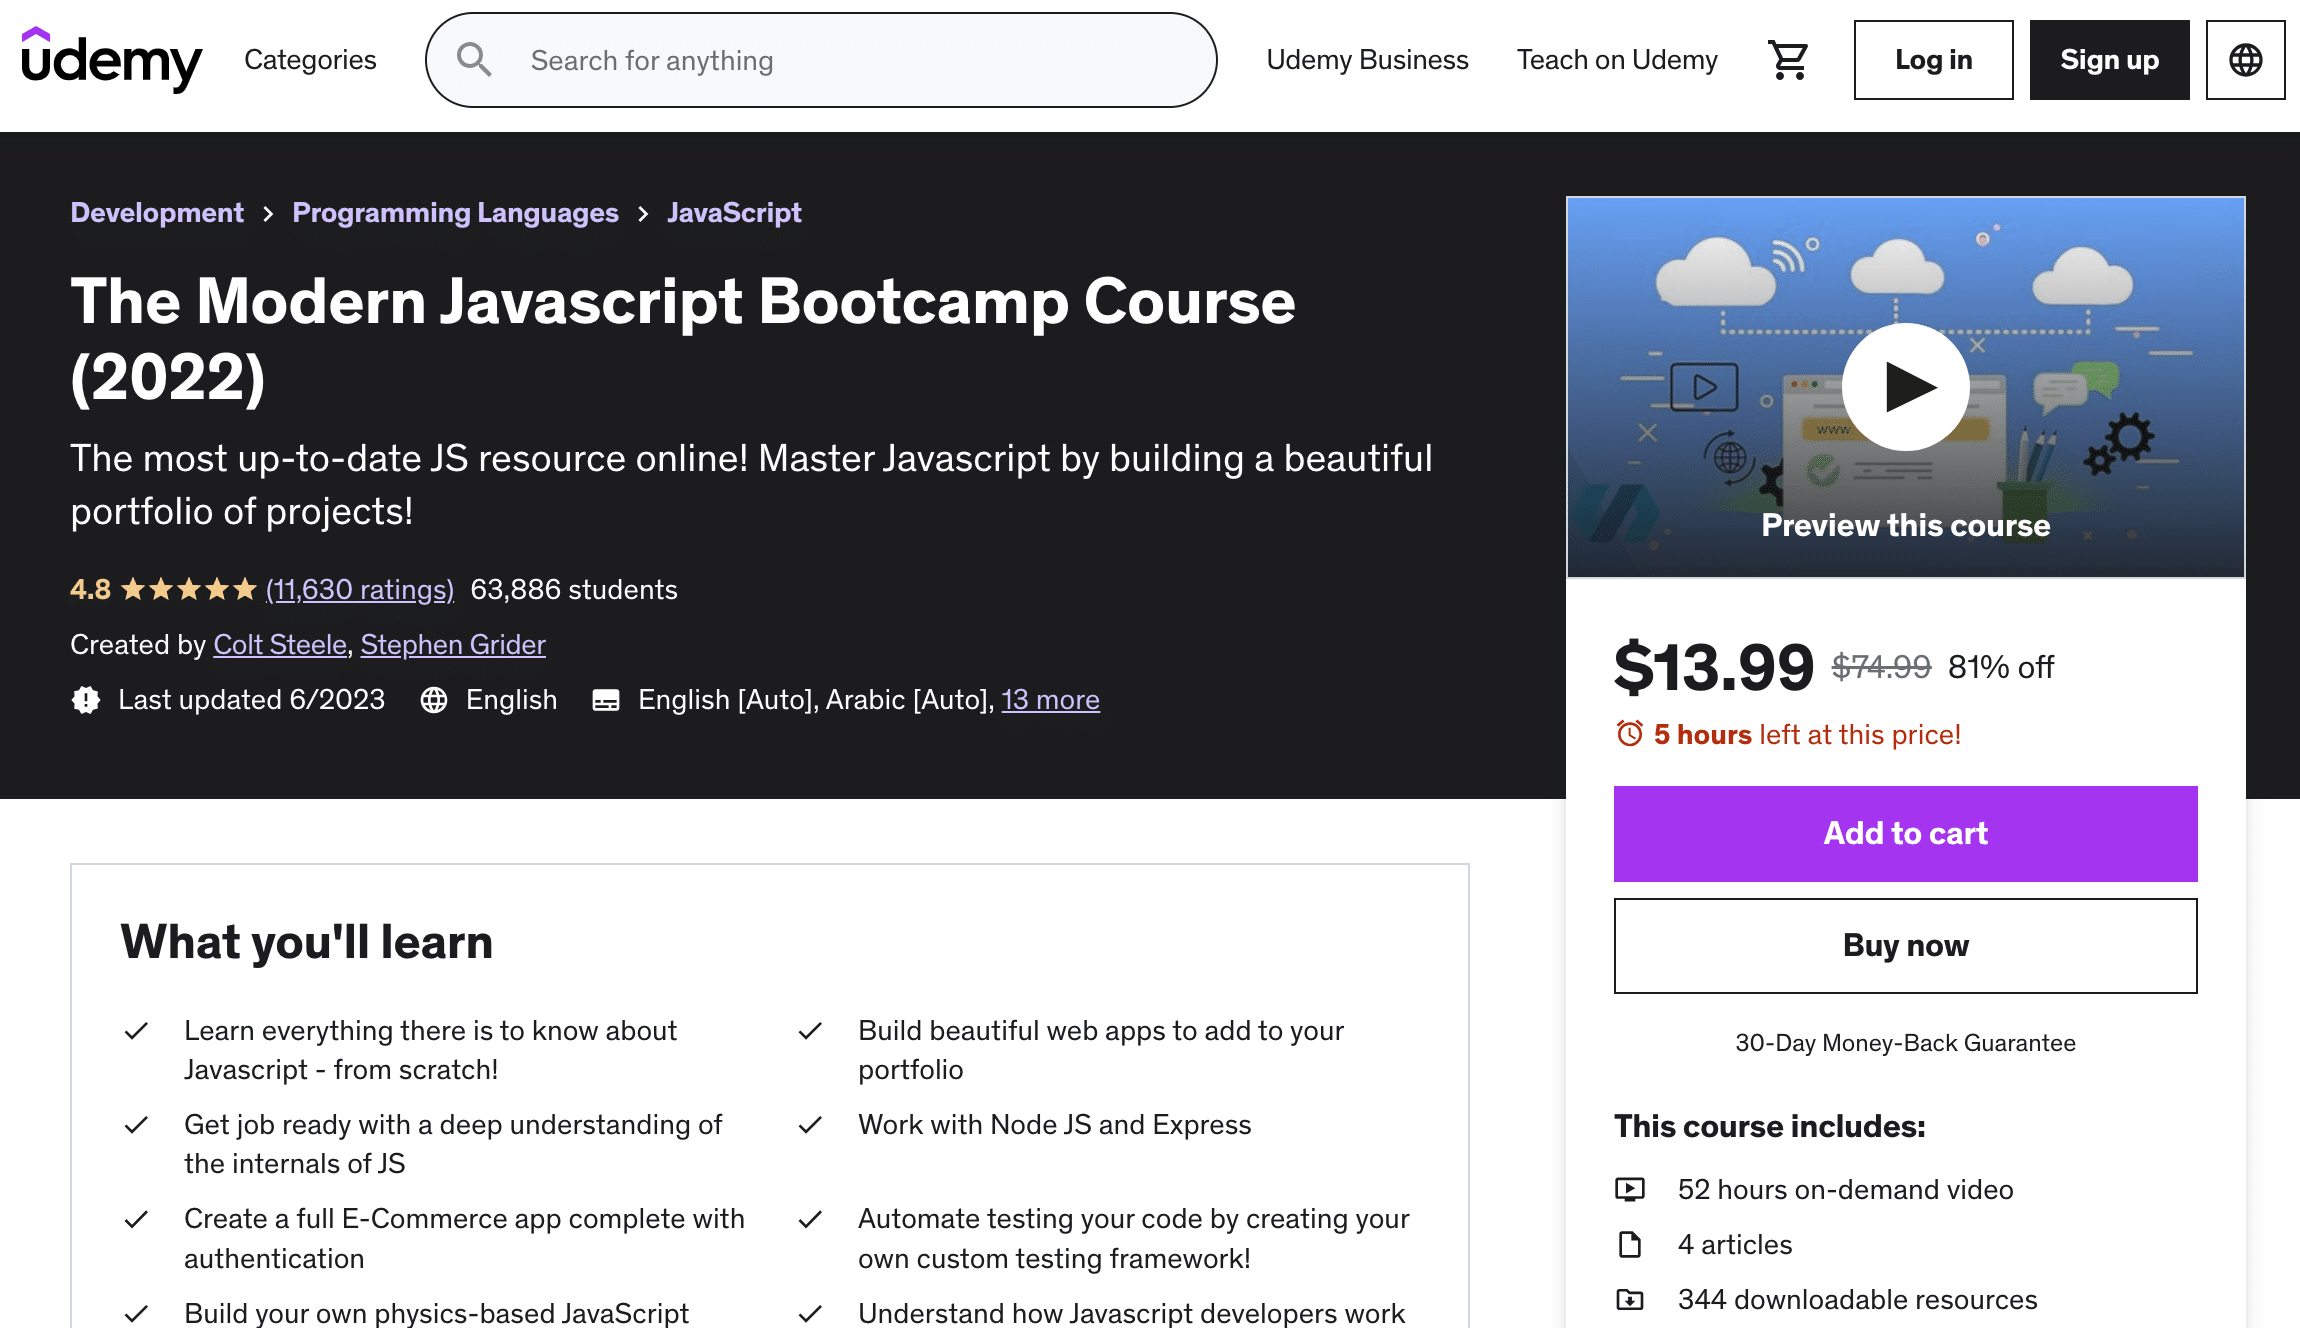 The Modern Javascript Bootcamp Course on Udemy